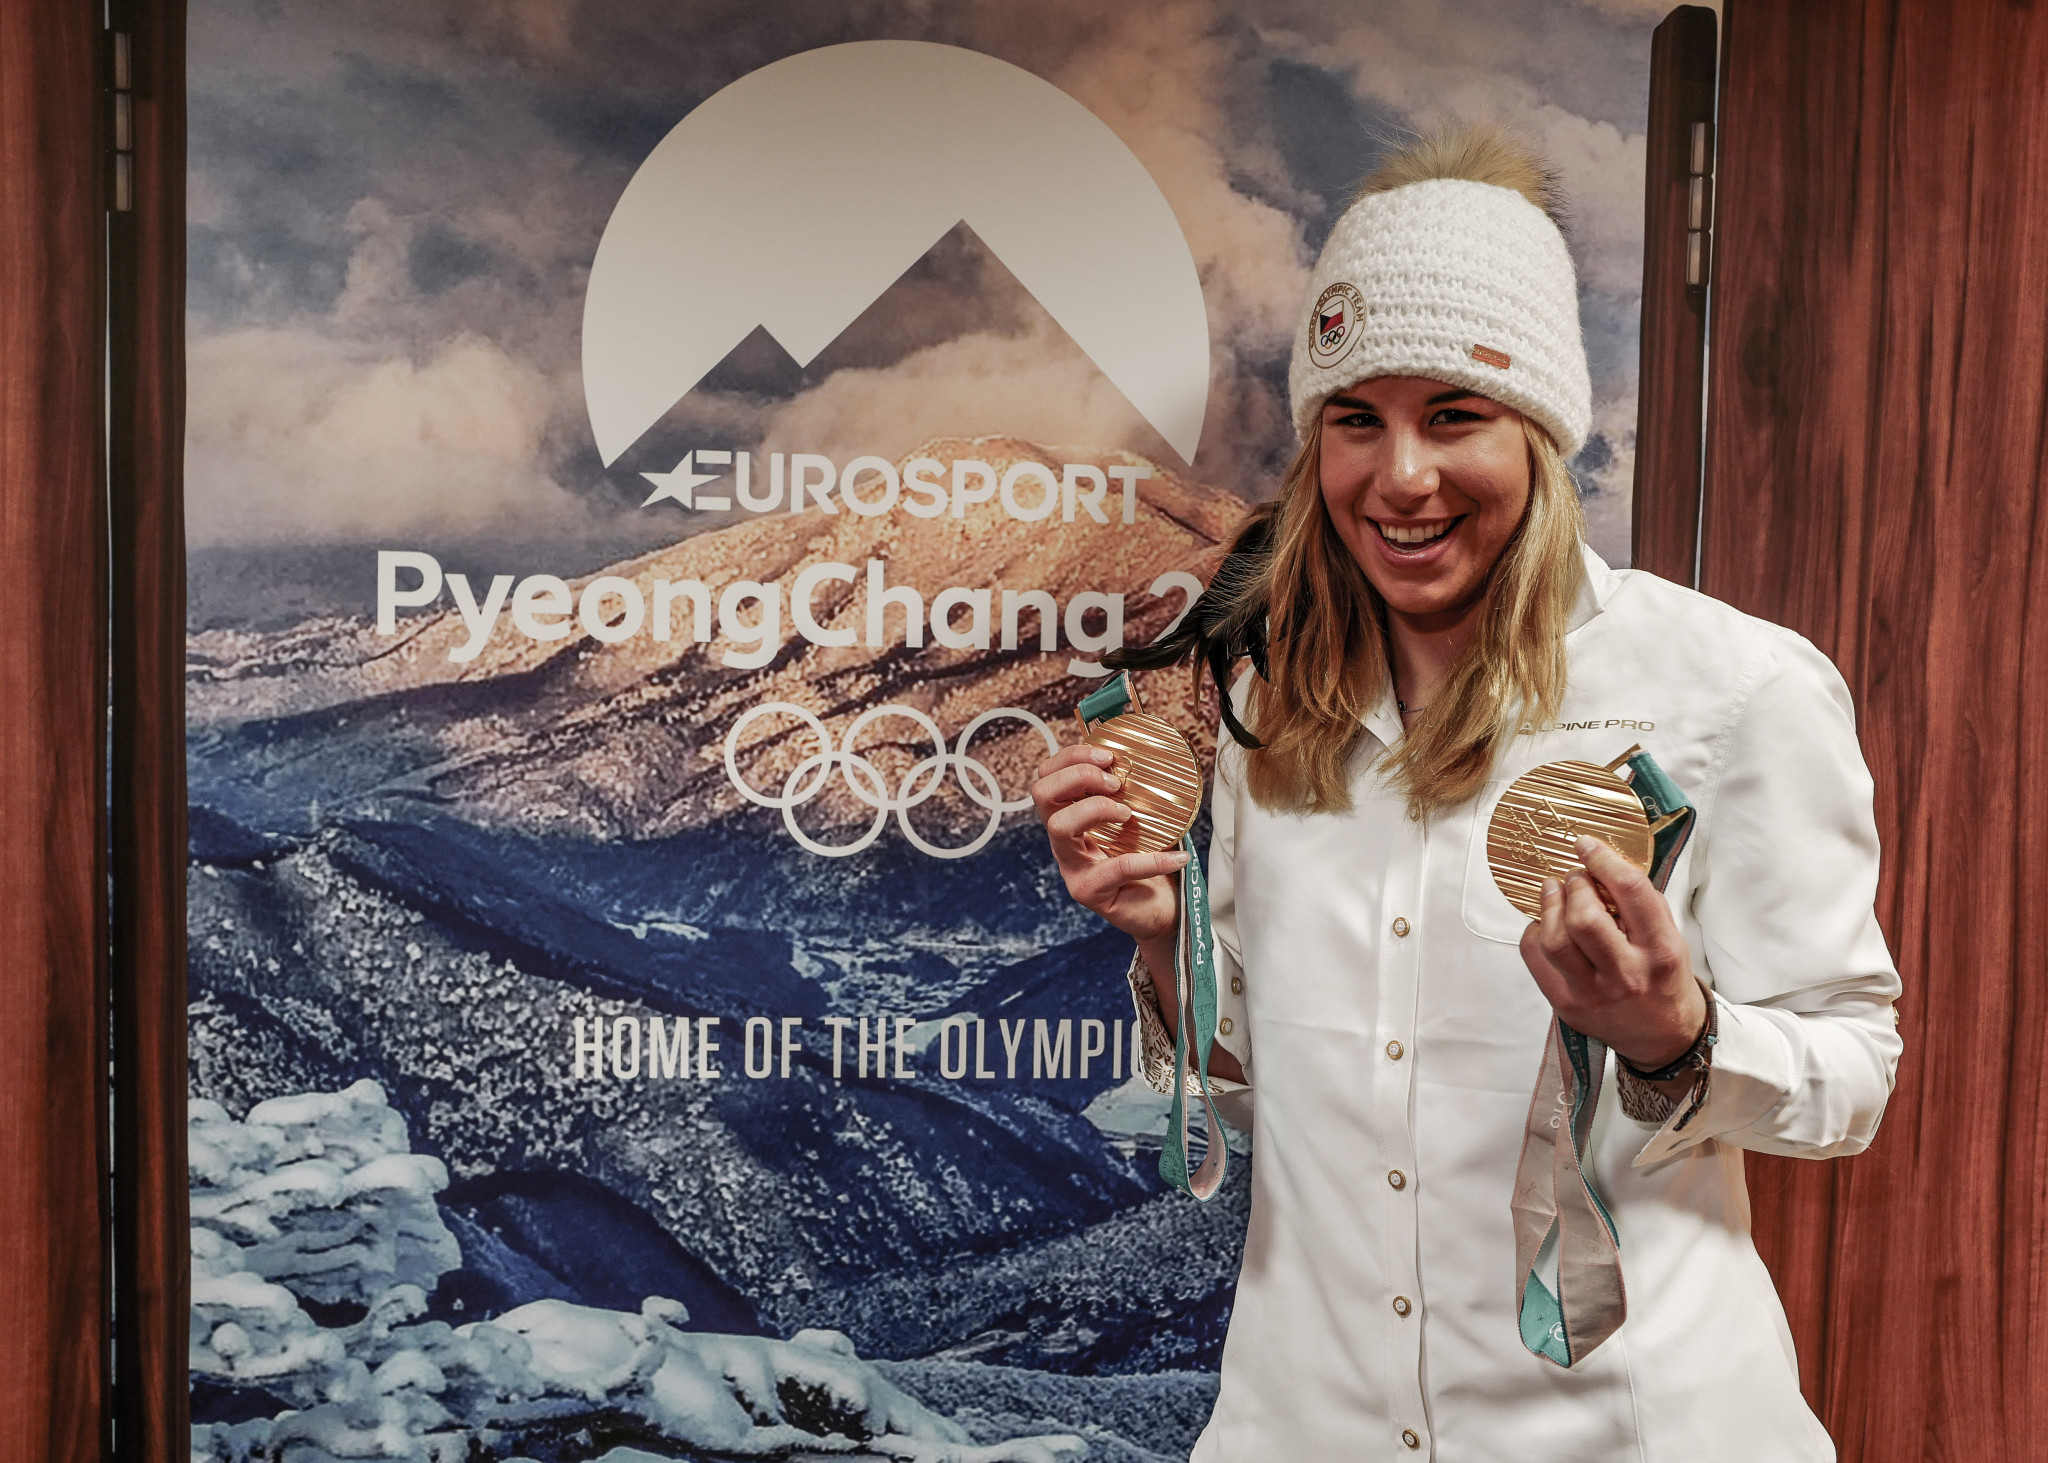 Eurosport welcomed a host of Olympic champions to their studios during Pyeongchang 2018, including historic skiing and snowboarding gold medallist Ester Ledecka ©Getty Images/Eurosport